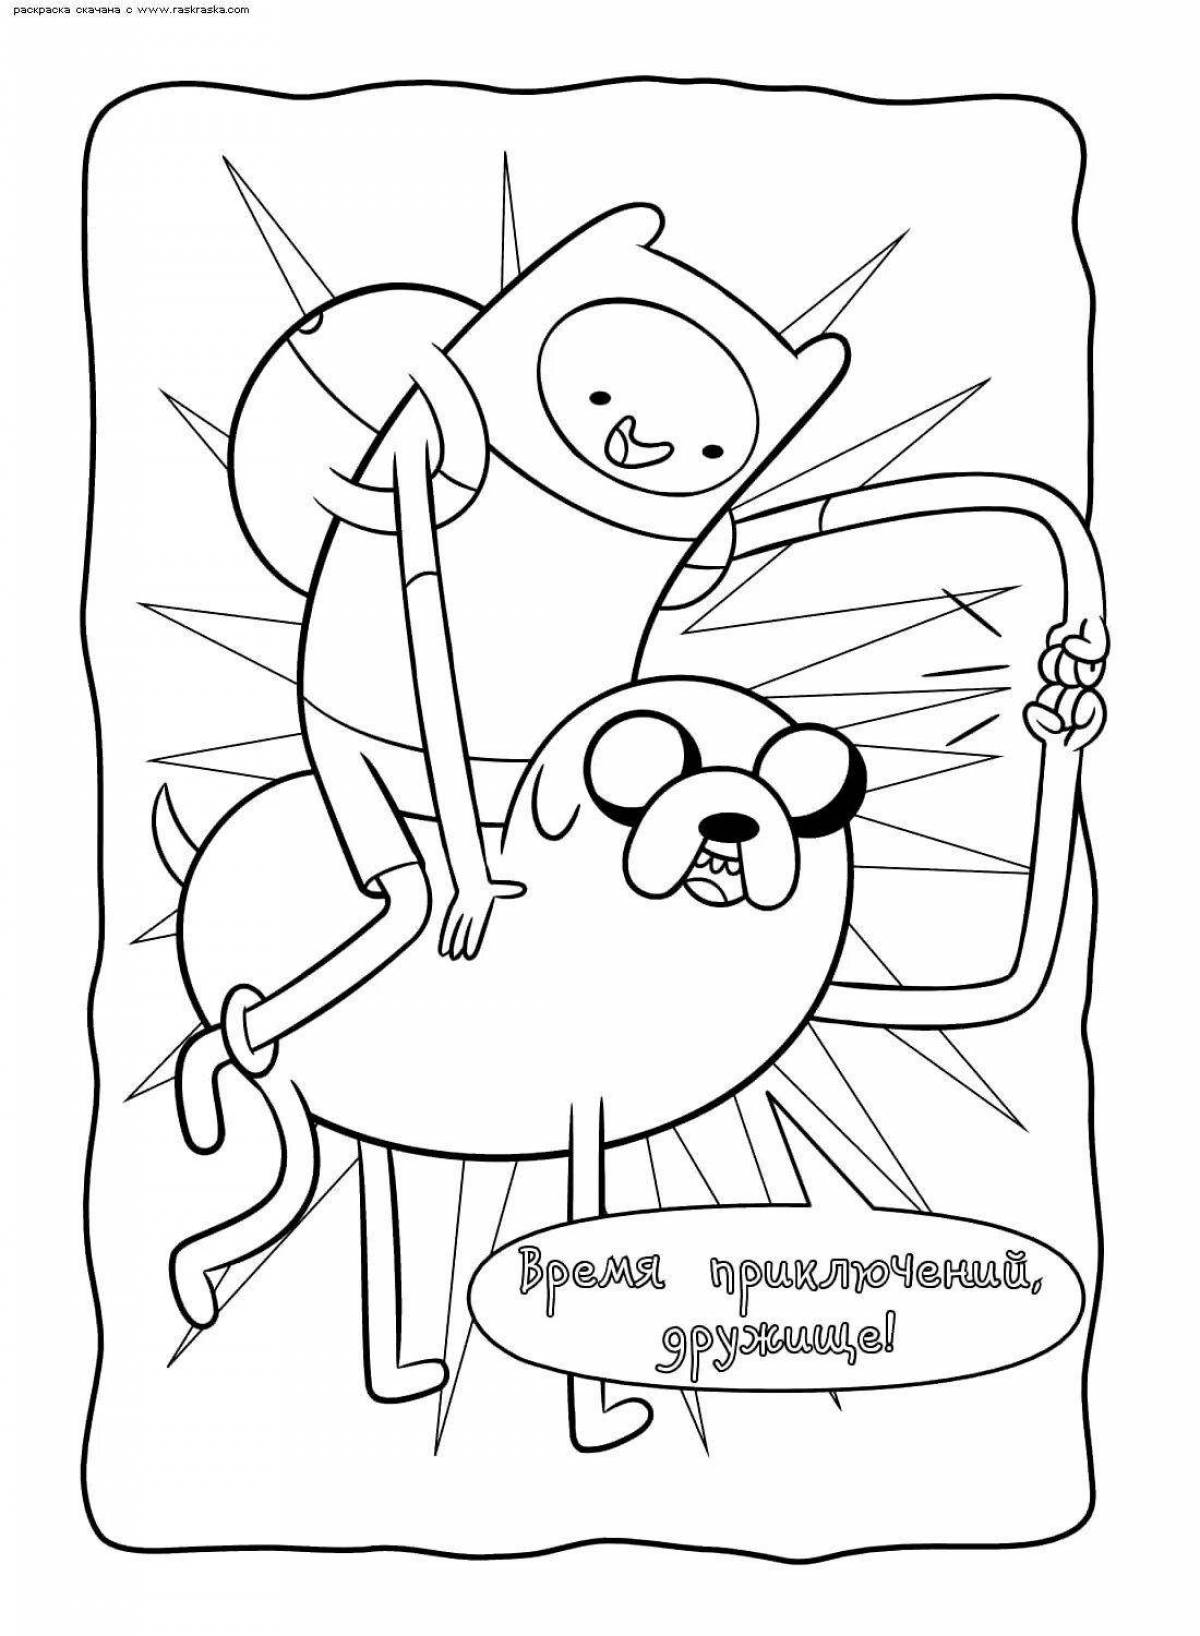 Coloring jake adventure time color-explosion